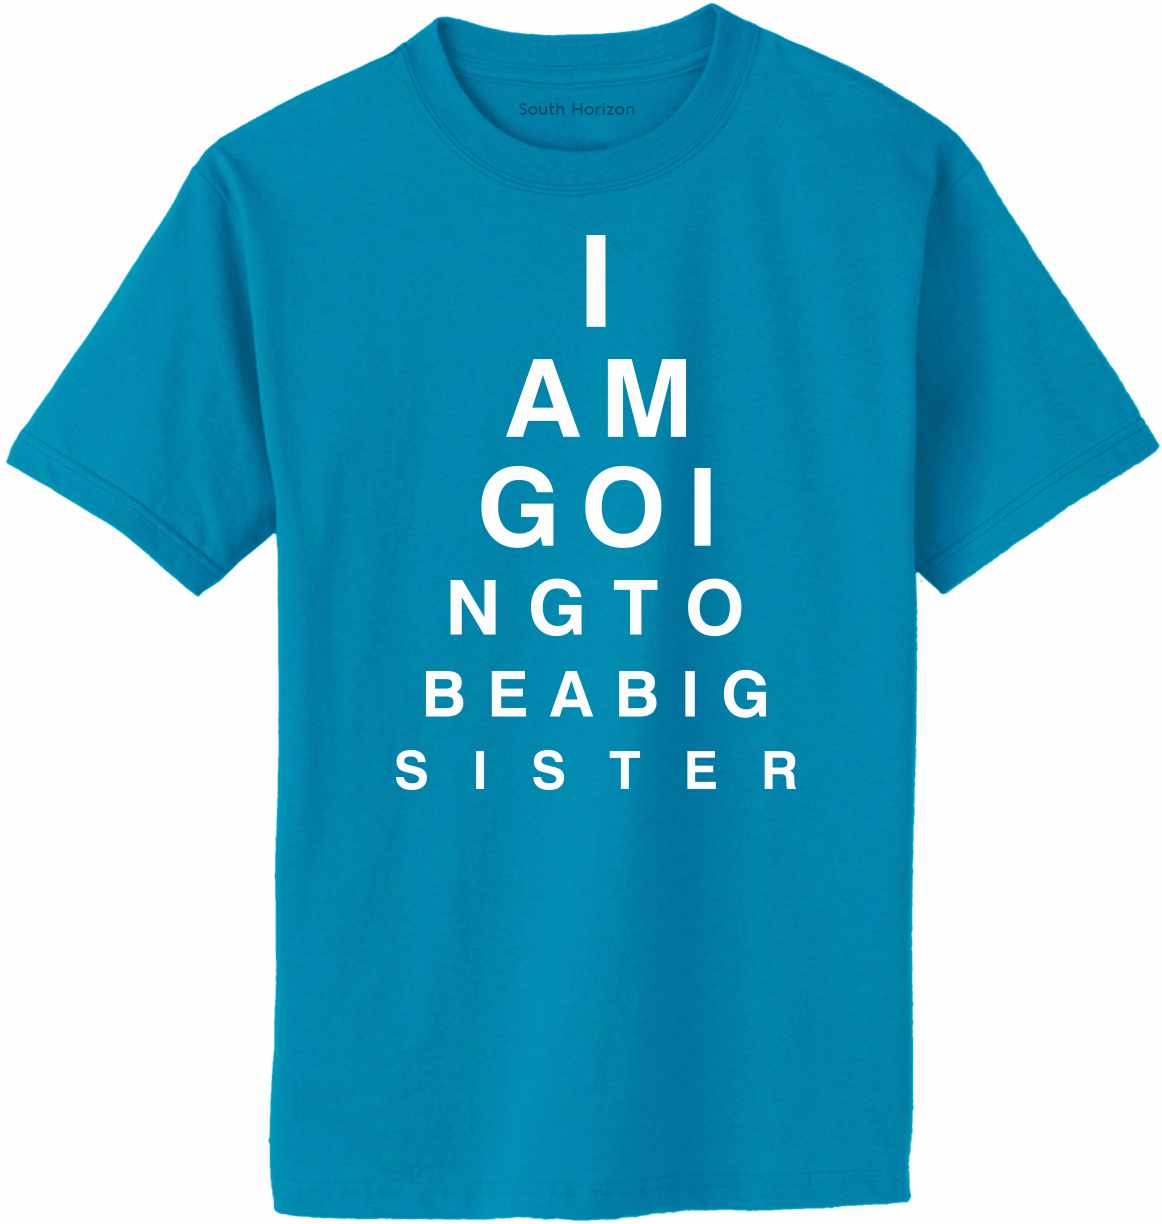 I AM GOING TO BE BIG SISTER EYE CHART Adult T-Shirt (#1099-1)